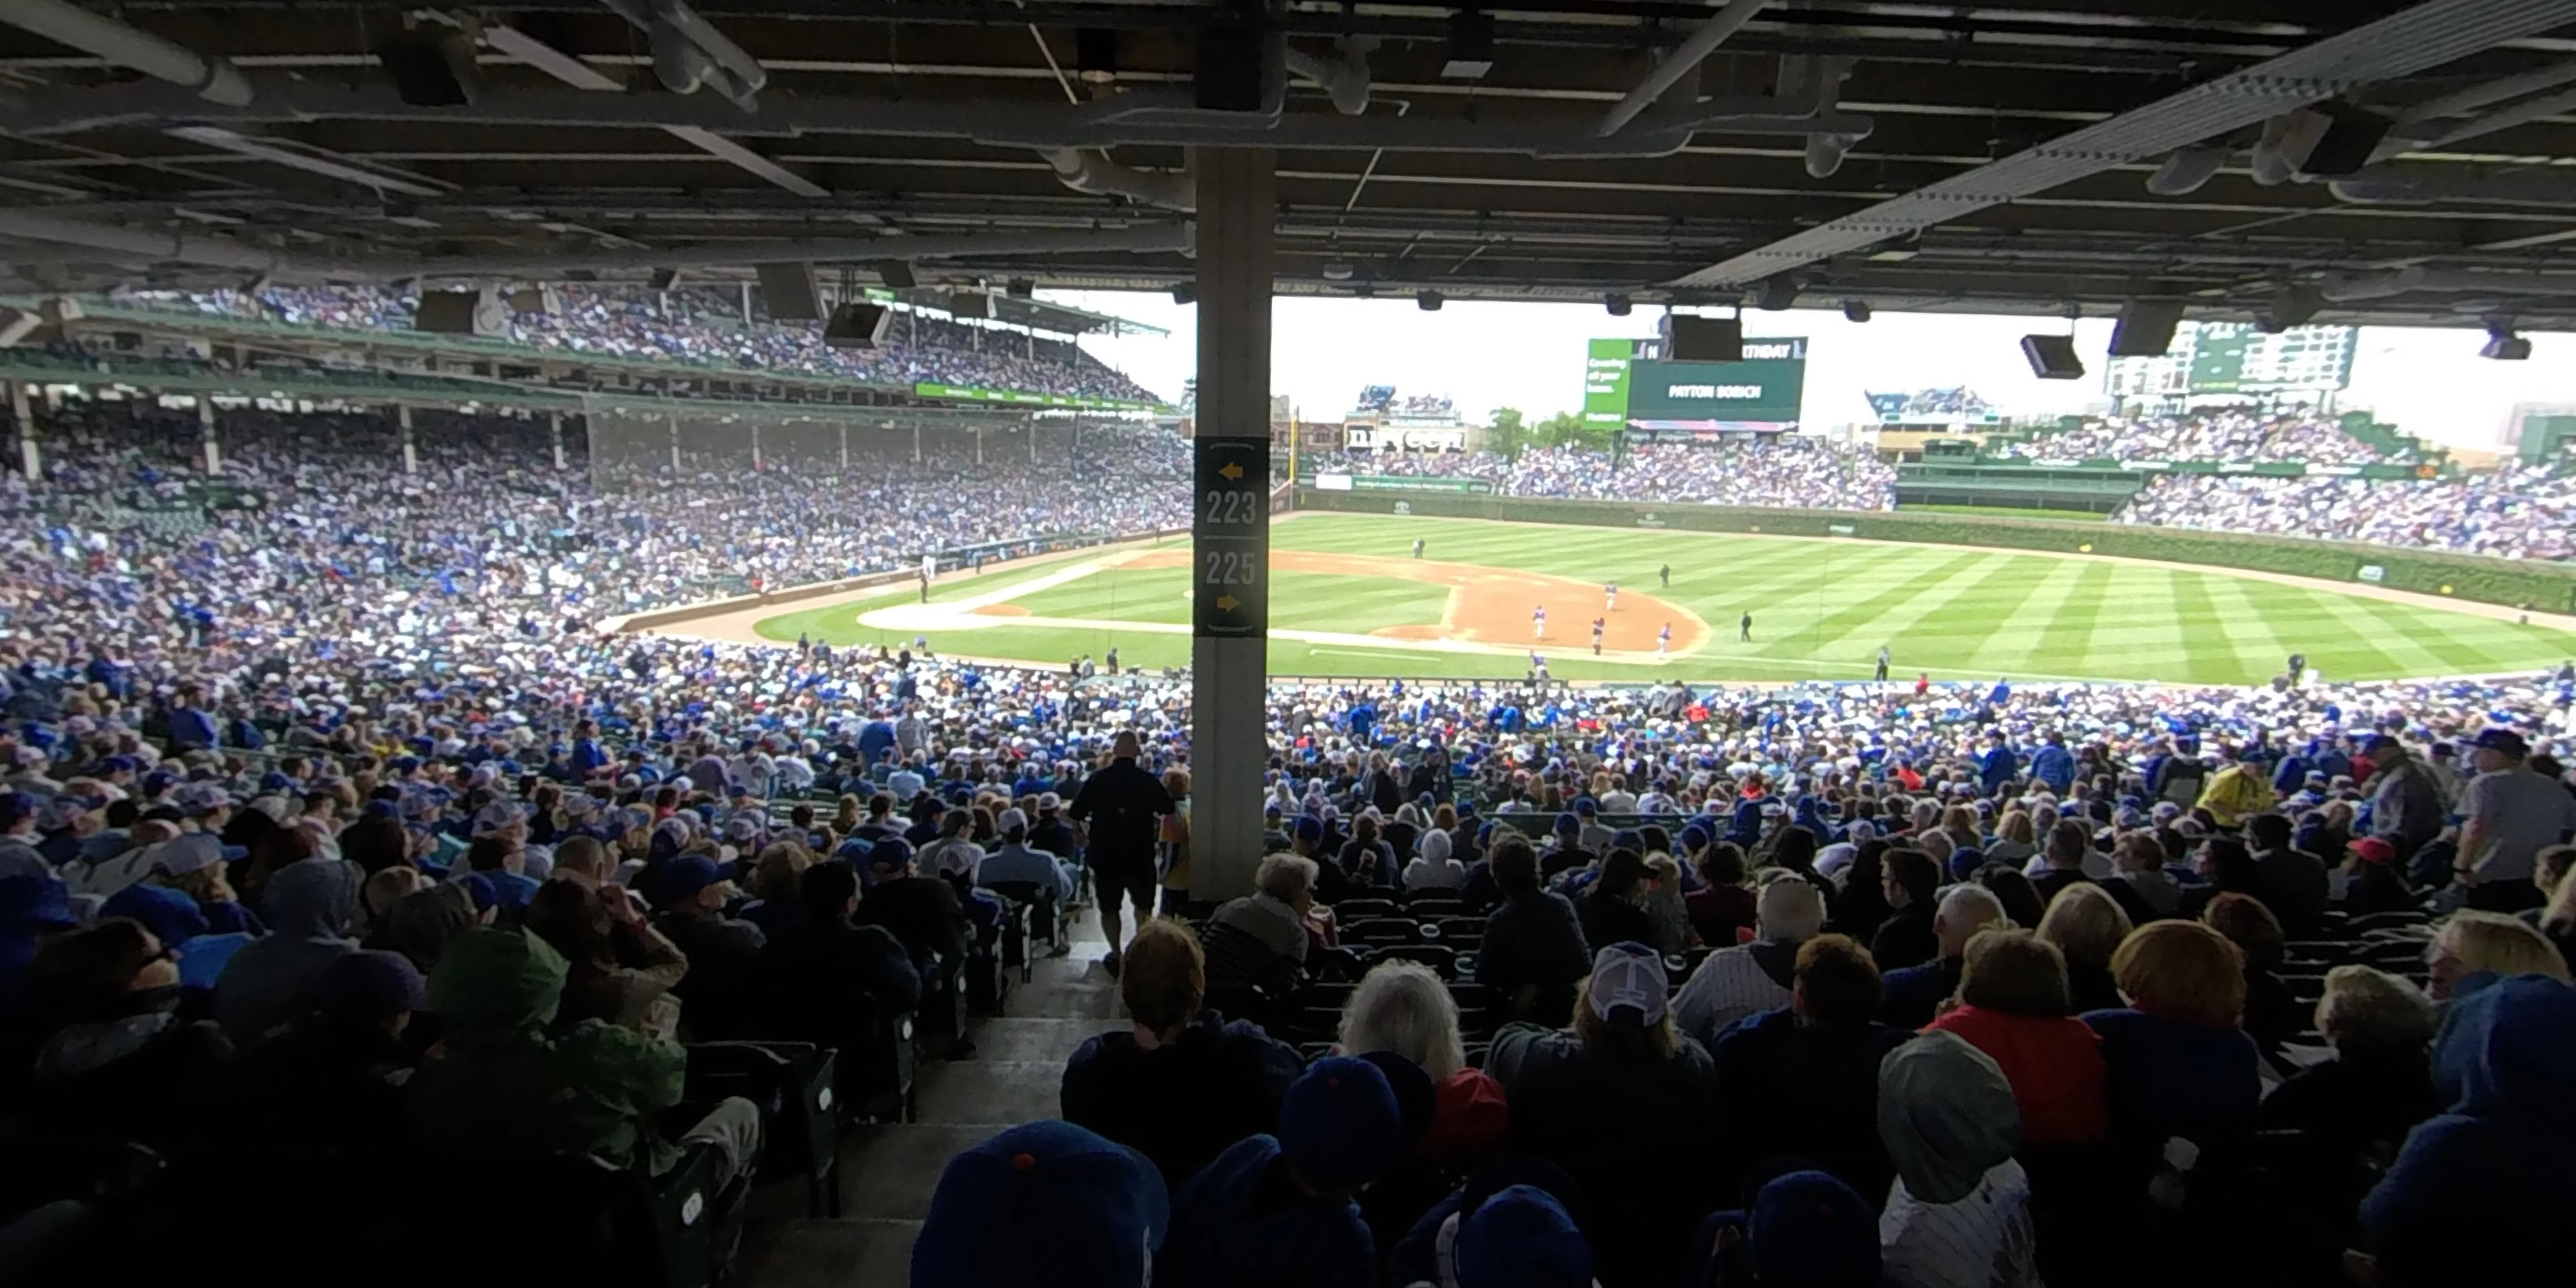 section 223 panoramic seat view  for baseball - wrigley field